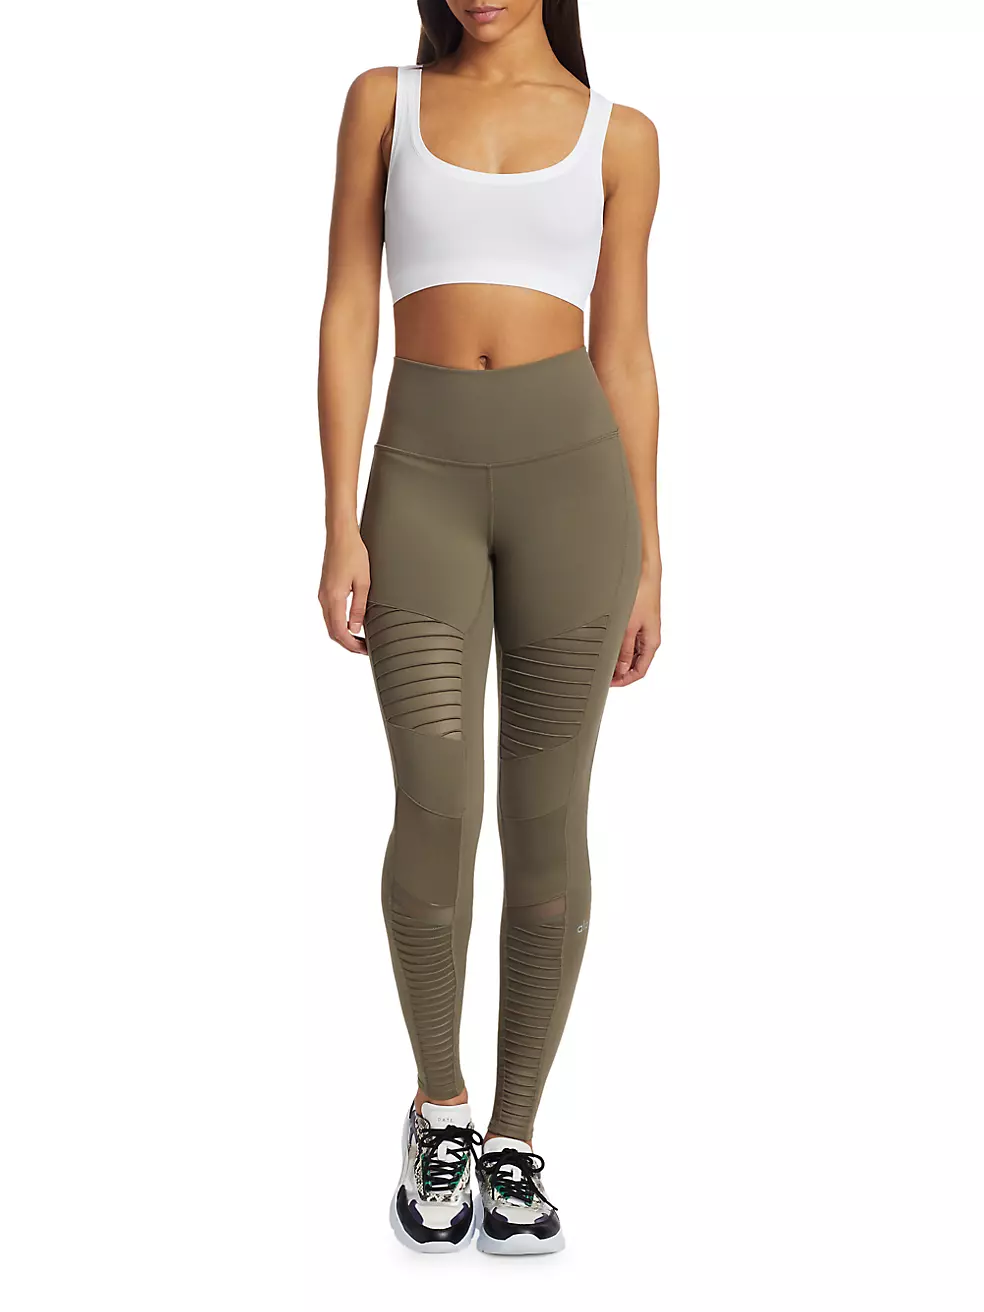 High-Waist Moto Legging in Olive Branch by Alo Yoga